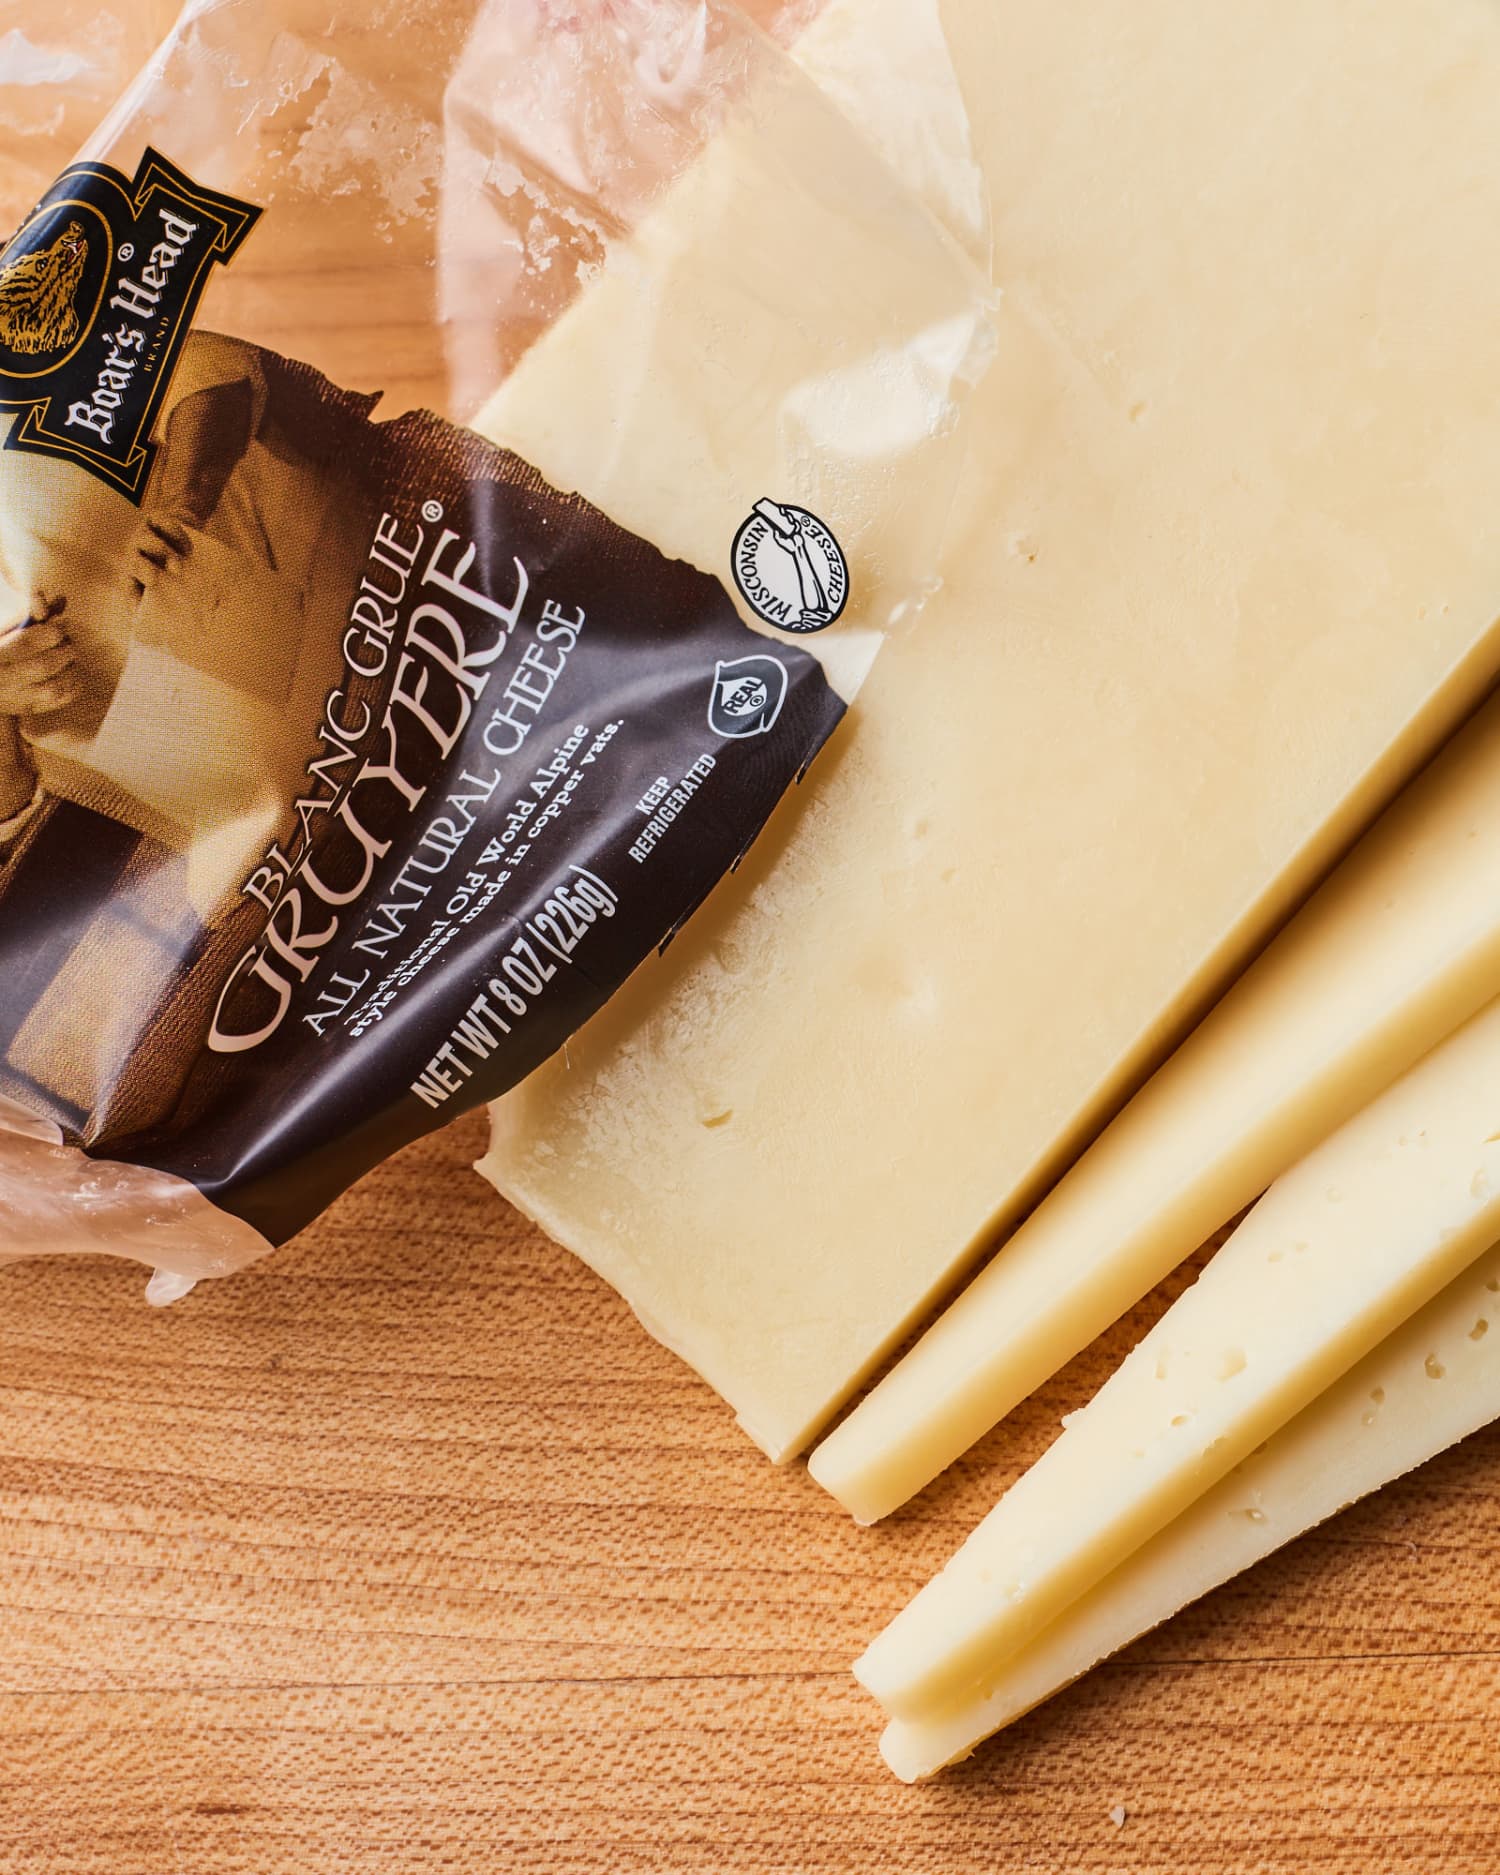 The Best Way to Store Cheese, According to a Cheese Shop Owner